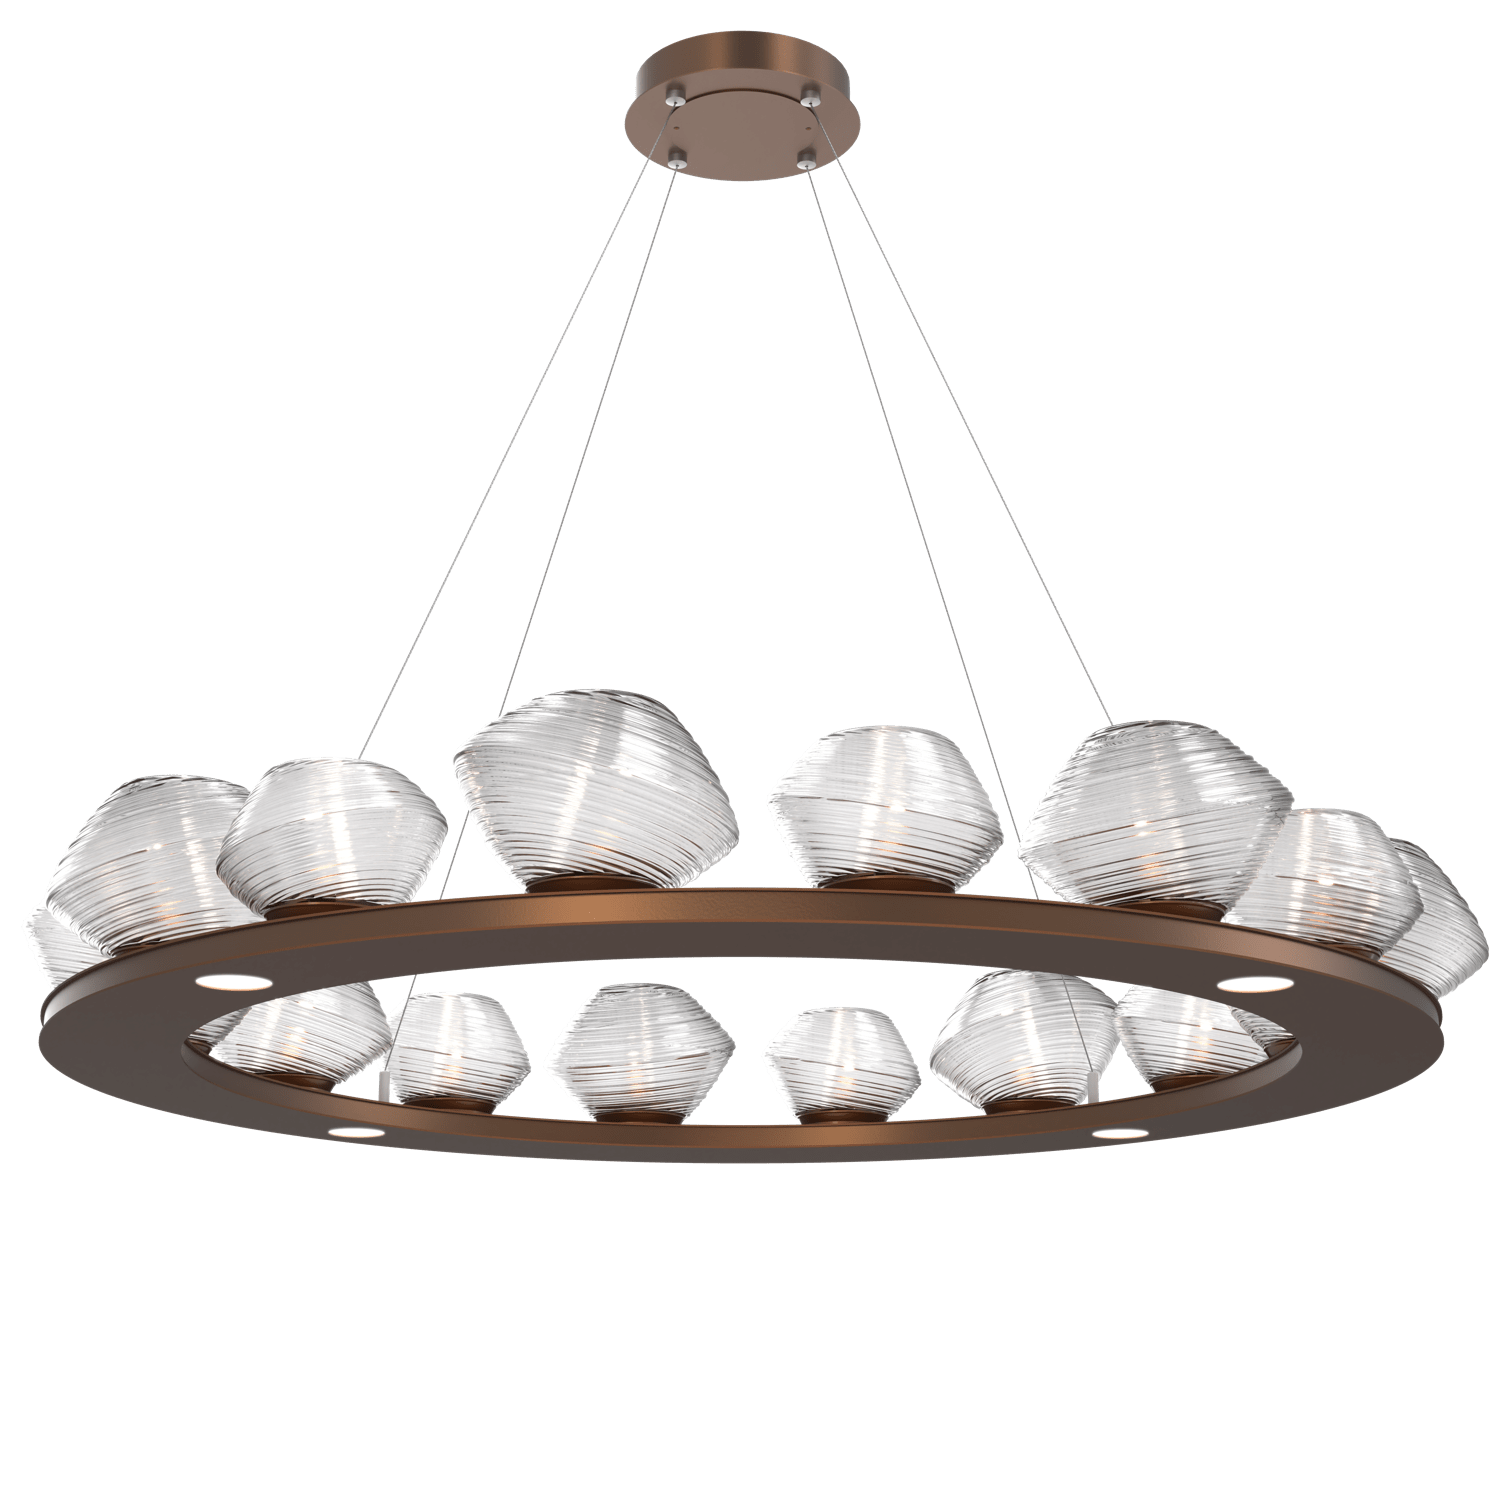 CHB0089-0D-BB-C-Hammerton-Studio-Mesa-48-inch-ring-chandelier-with-burnished-bronze-finish-and-clear-blown-glass-shades-and-LED-lamping